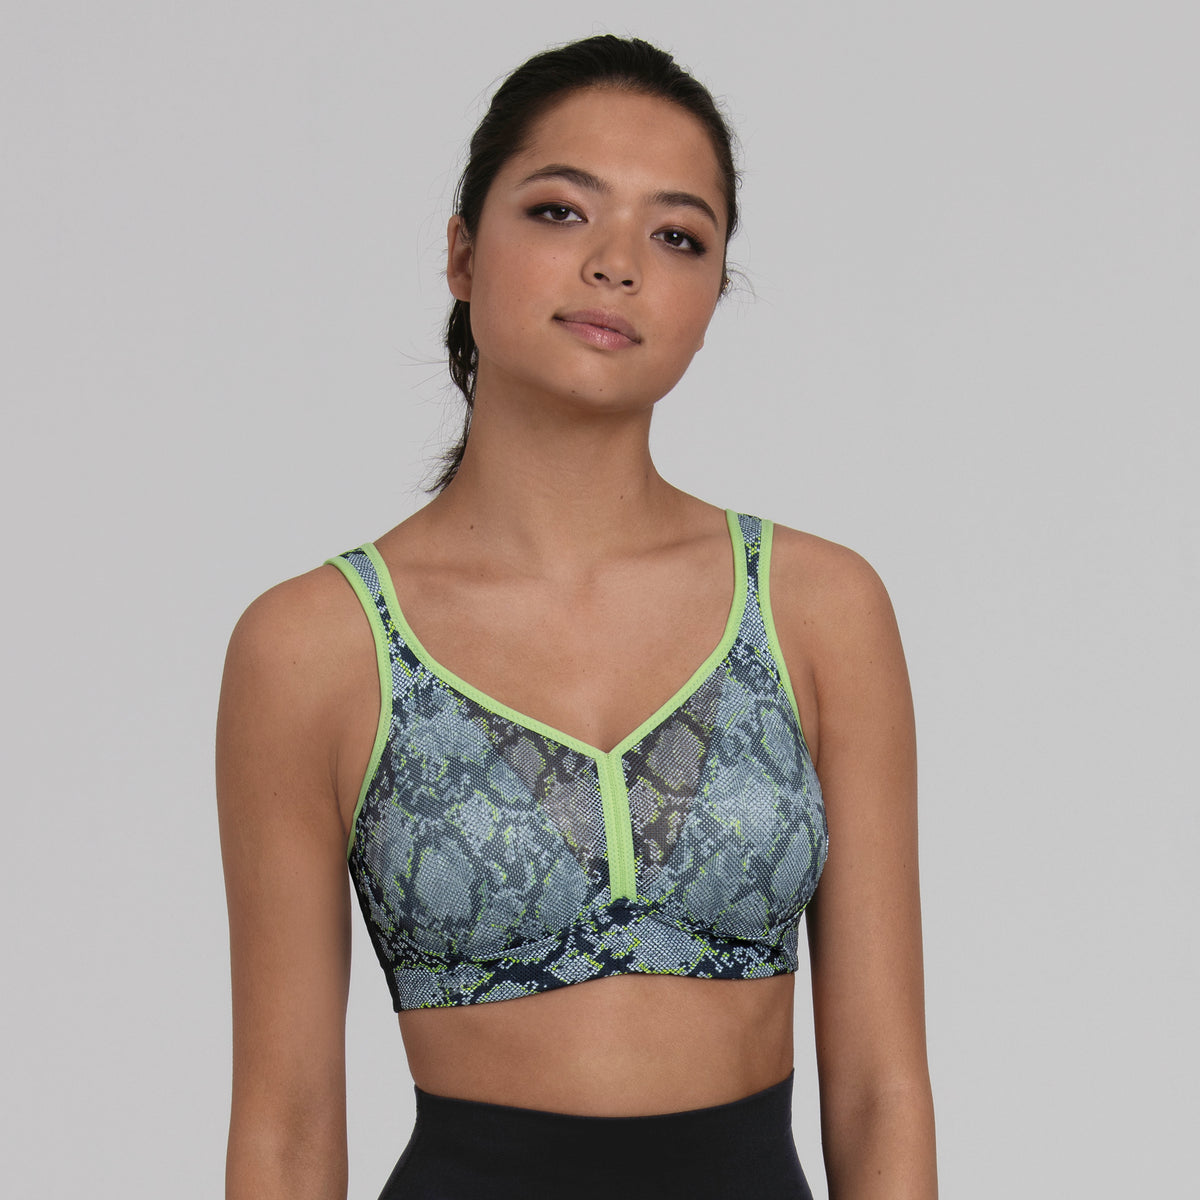 ANITA AIR CONTROL SPORTS BRA WITH PADDED CUPS - VIPER GREY